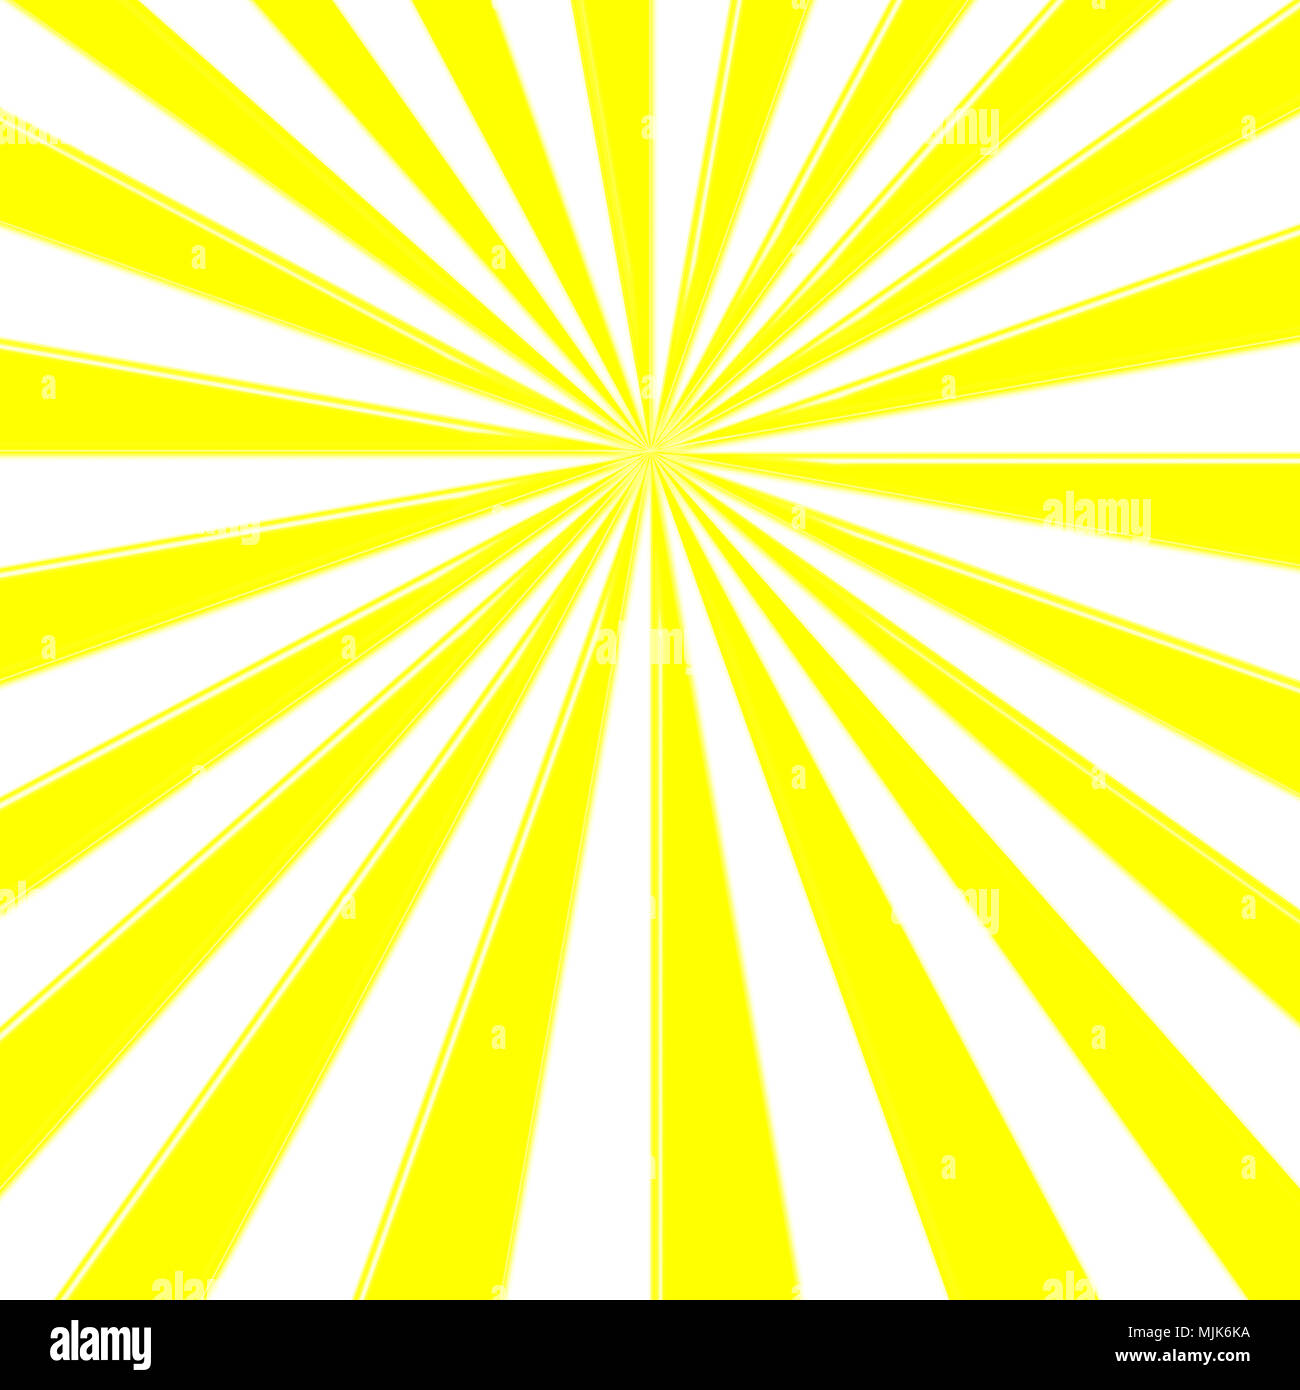 Stock Illustration - Yellow Colored Sunbeams Centered, Blank Copy Space, 3D Illustration, Basic Bright Yellow Background. Stock Photo